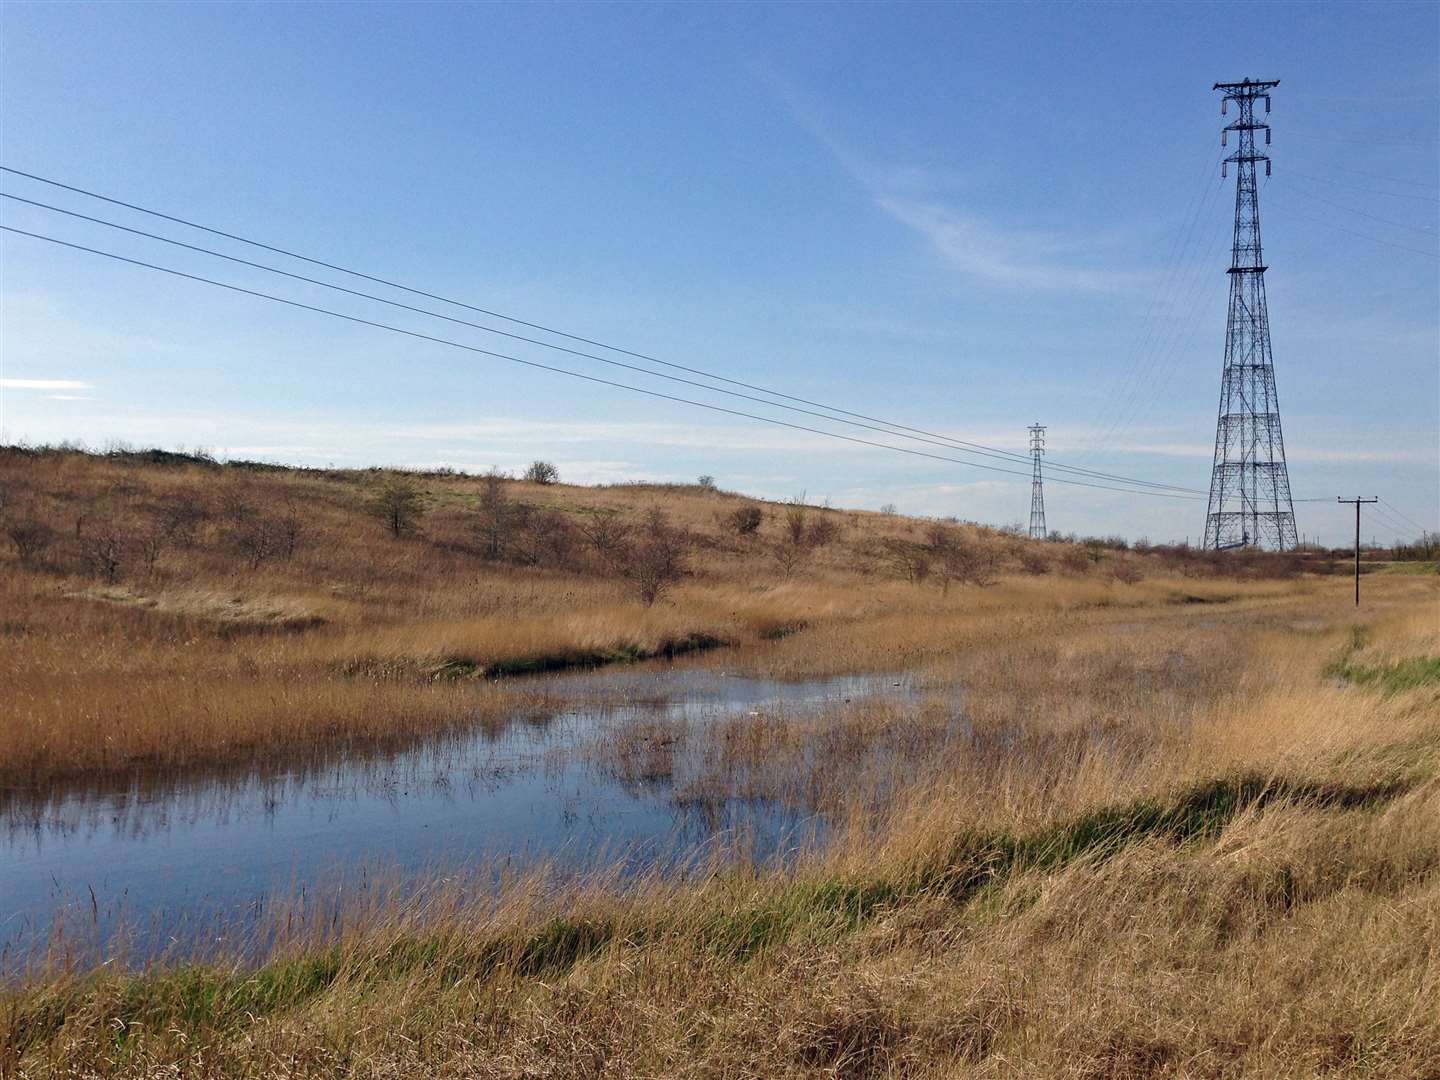 The Swanscombe Marshes have been given SSSI protected status. Picture: Diamond Geezer